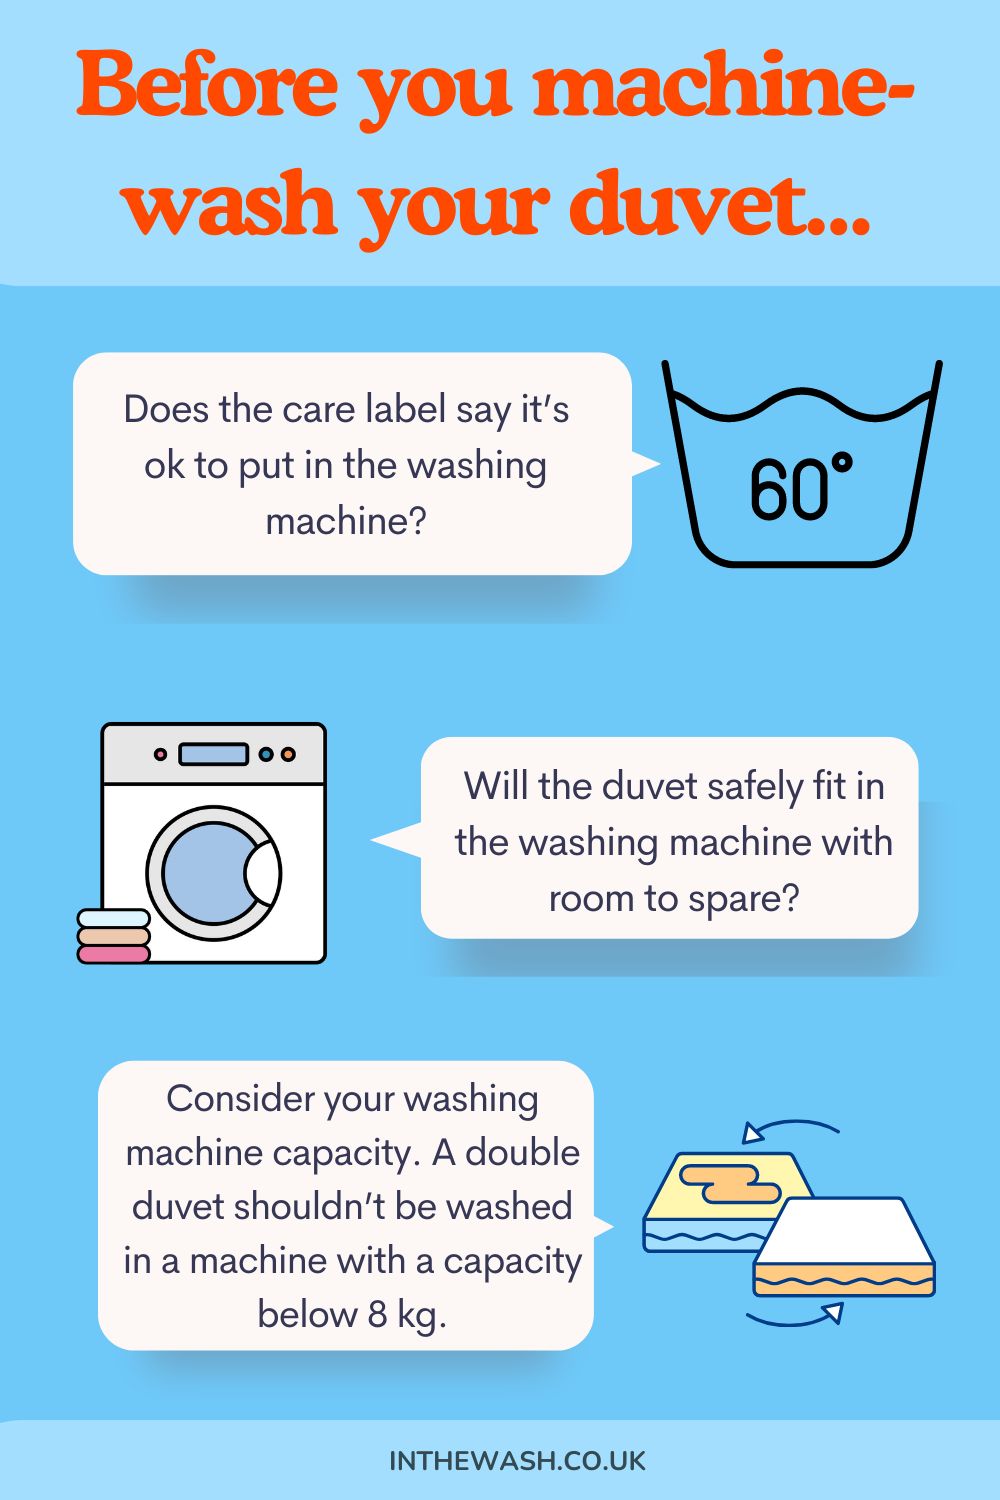 Can You Put a Duvet in the Washing Machine?